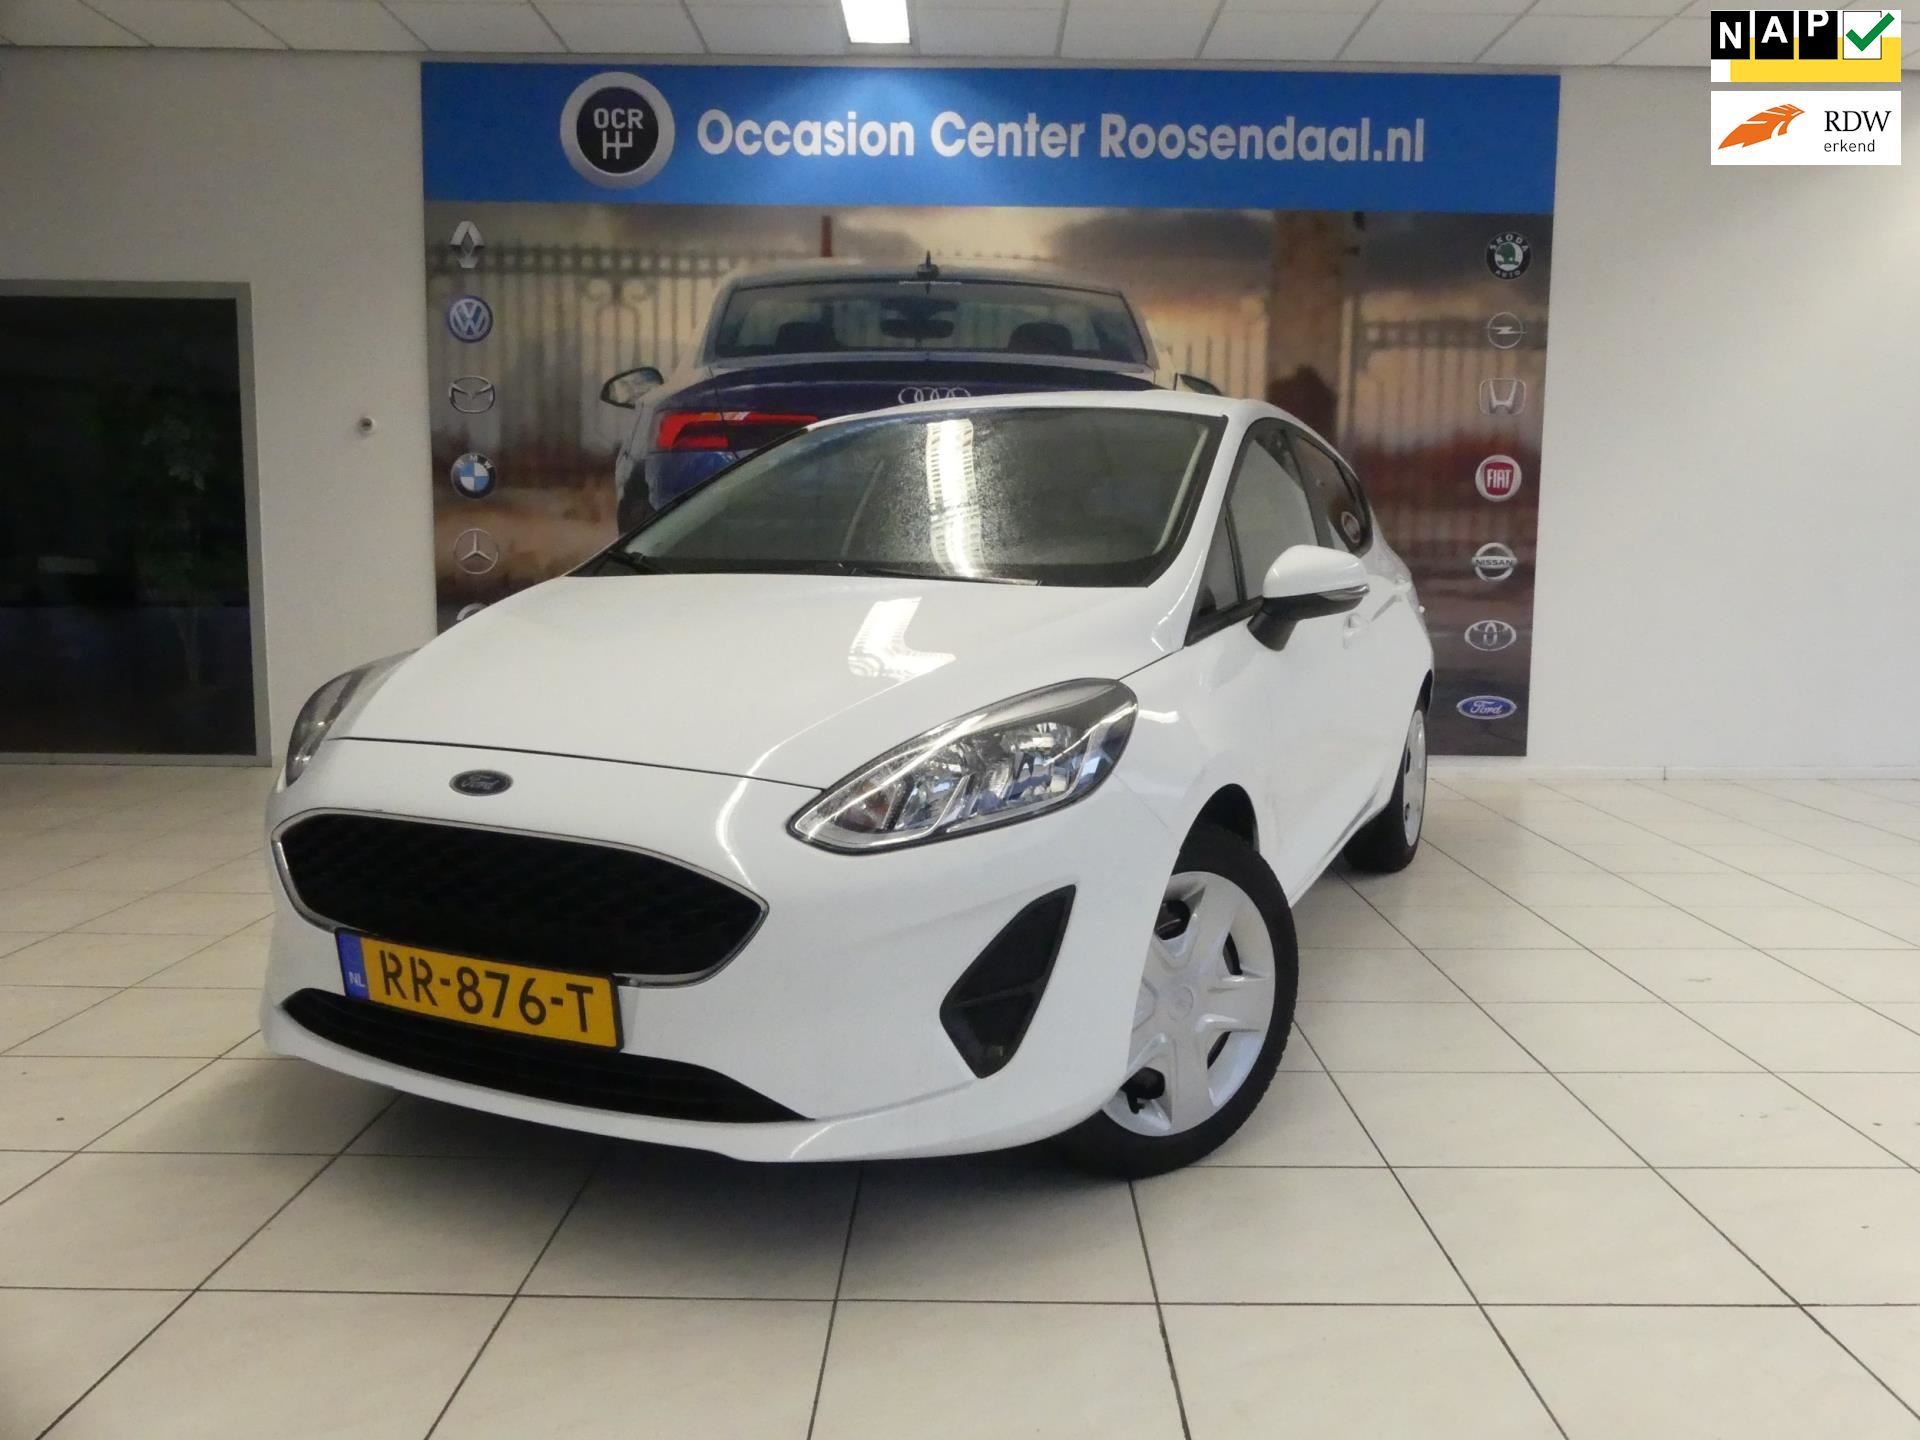 Ford Fiesta occasion - Occasion Center Roosendaal